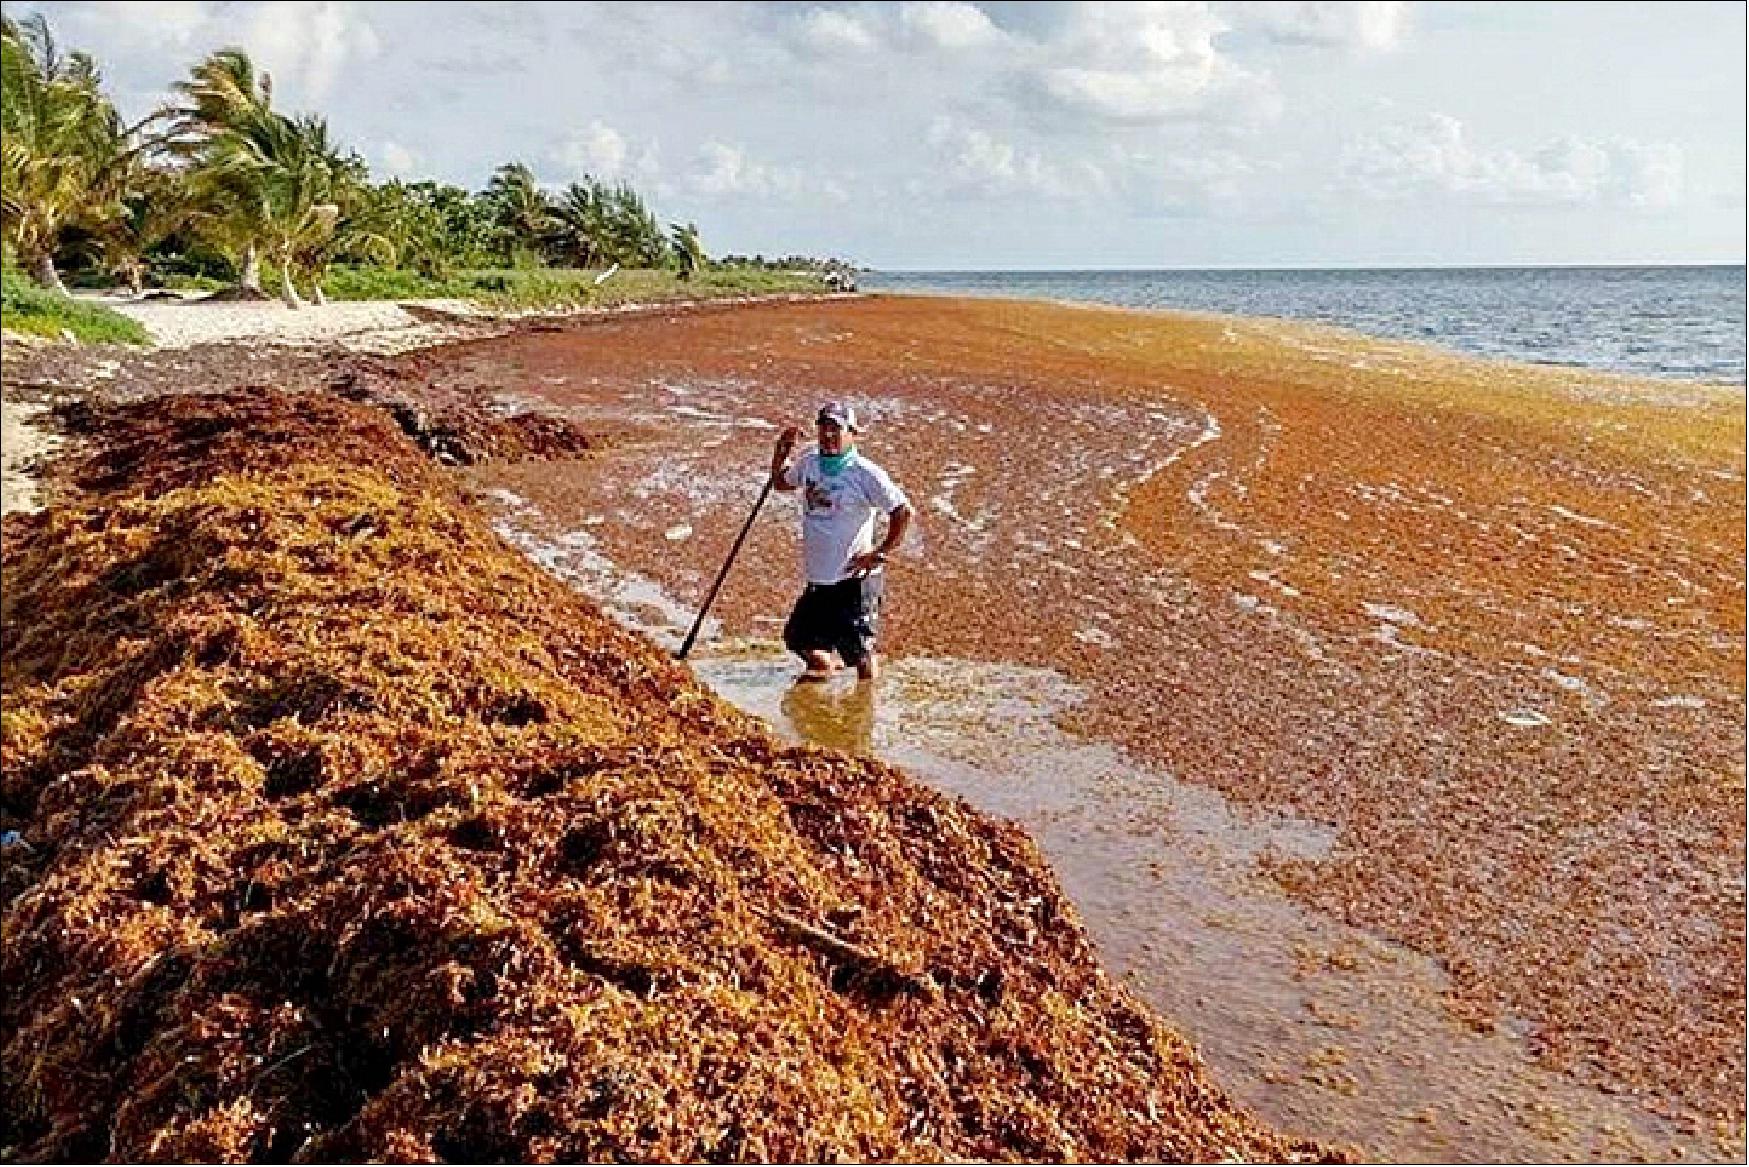 Figure 26: The photo shows Sargassum along a beach in Cancun, Mexico in 2015 (image credit: NASA Earth Observatory)